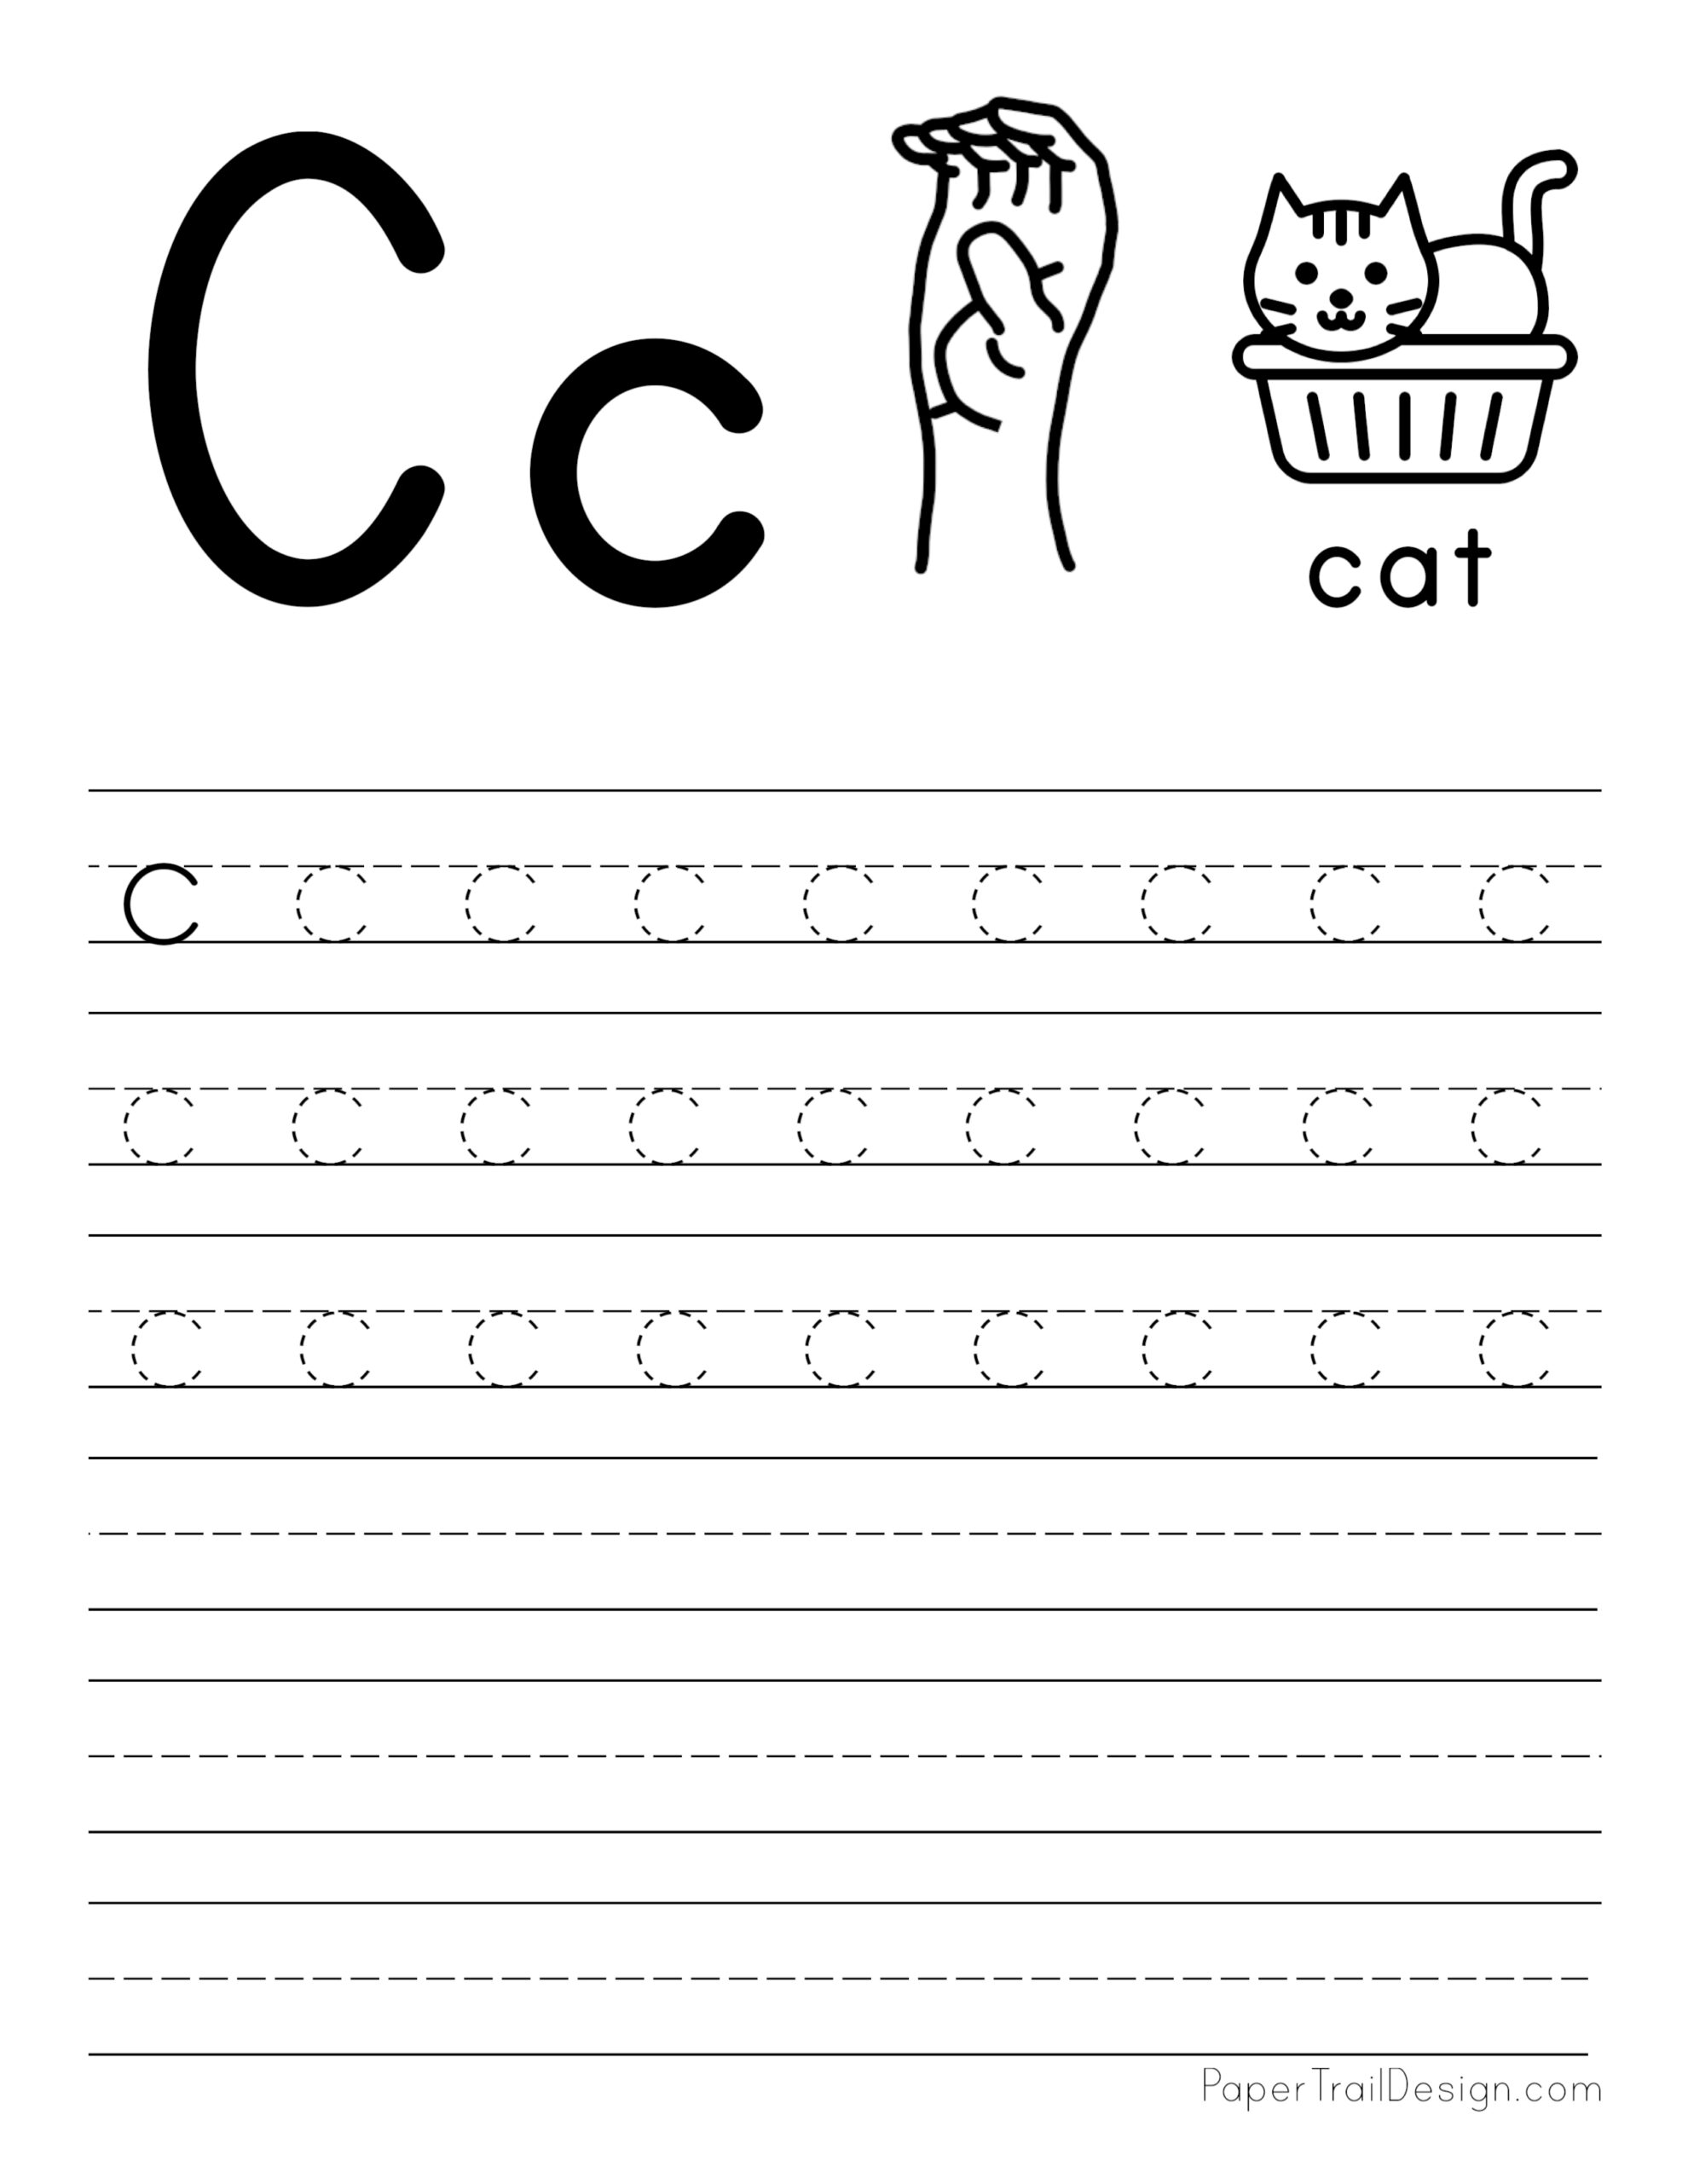 Free letter tracing worksheets